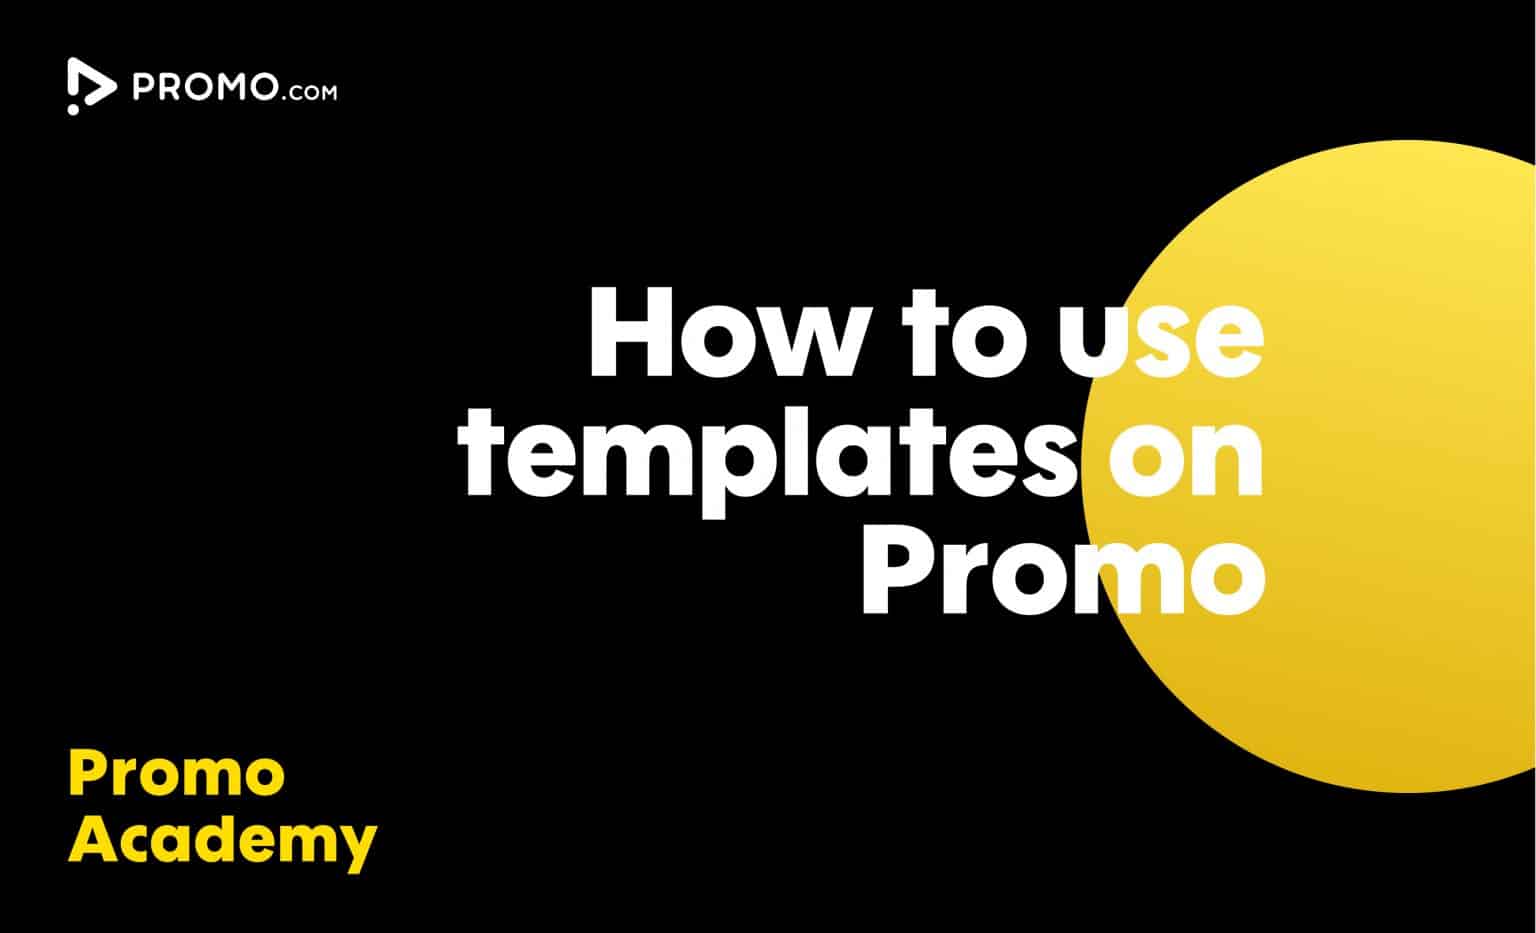 learn-how-to-use-ready-made-templates-promo